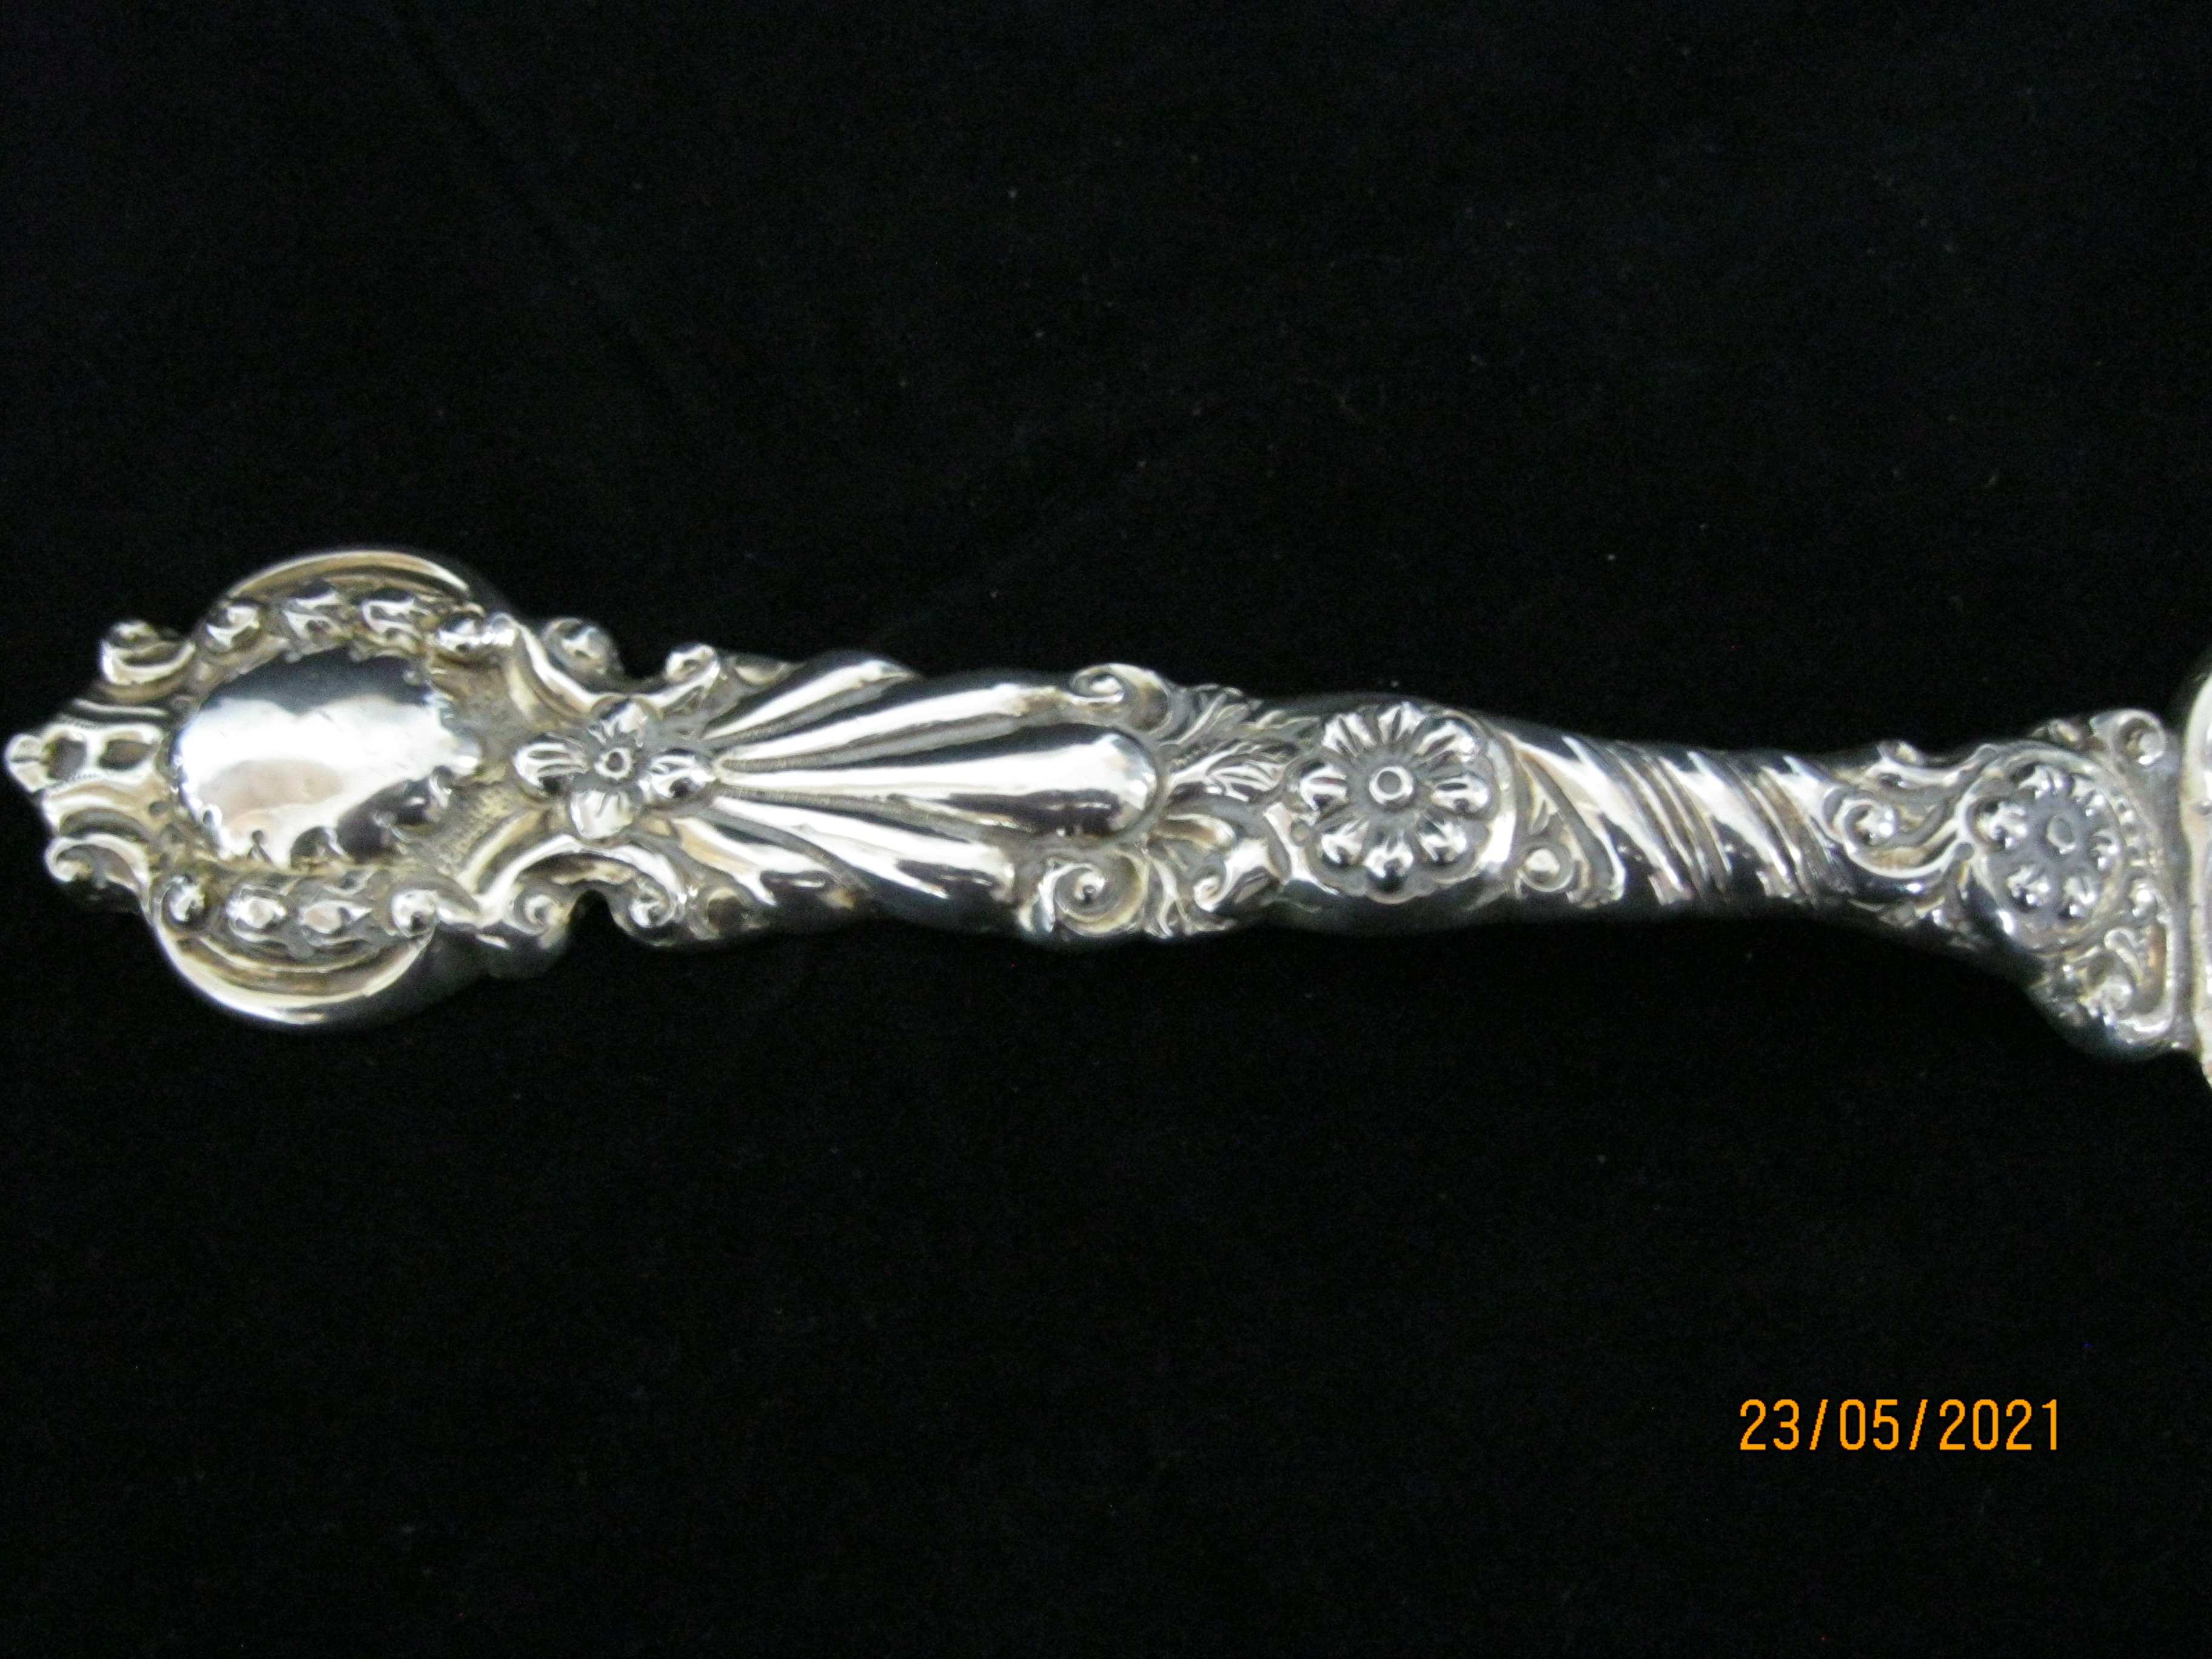 Antique Solid Silver Berry Spoon 1899 London - Image 3 of 6